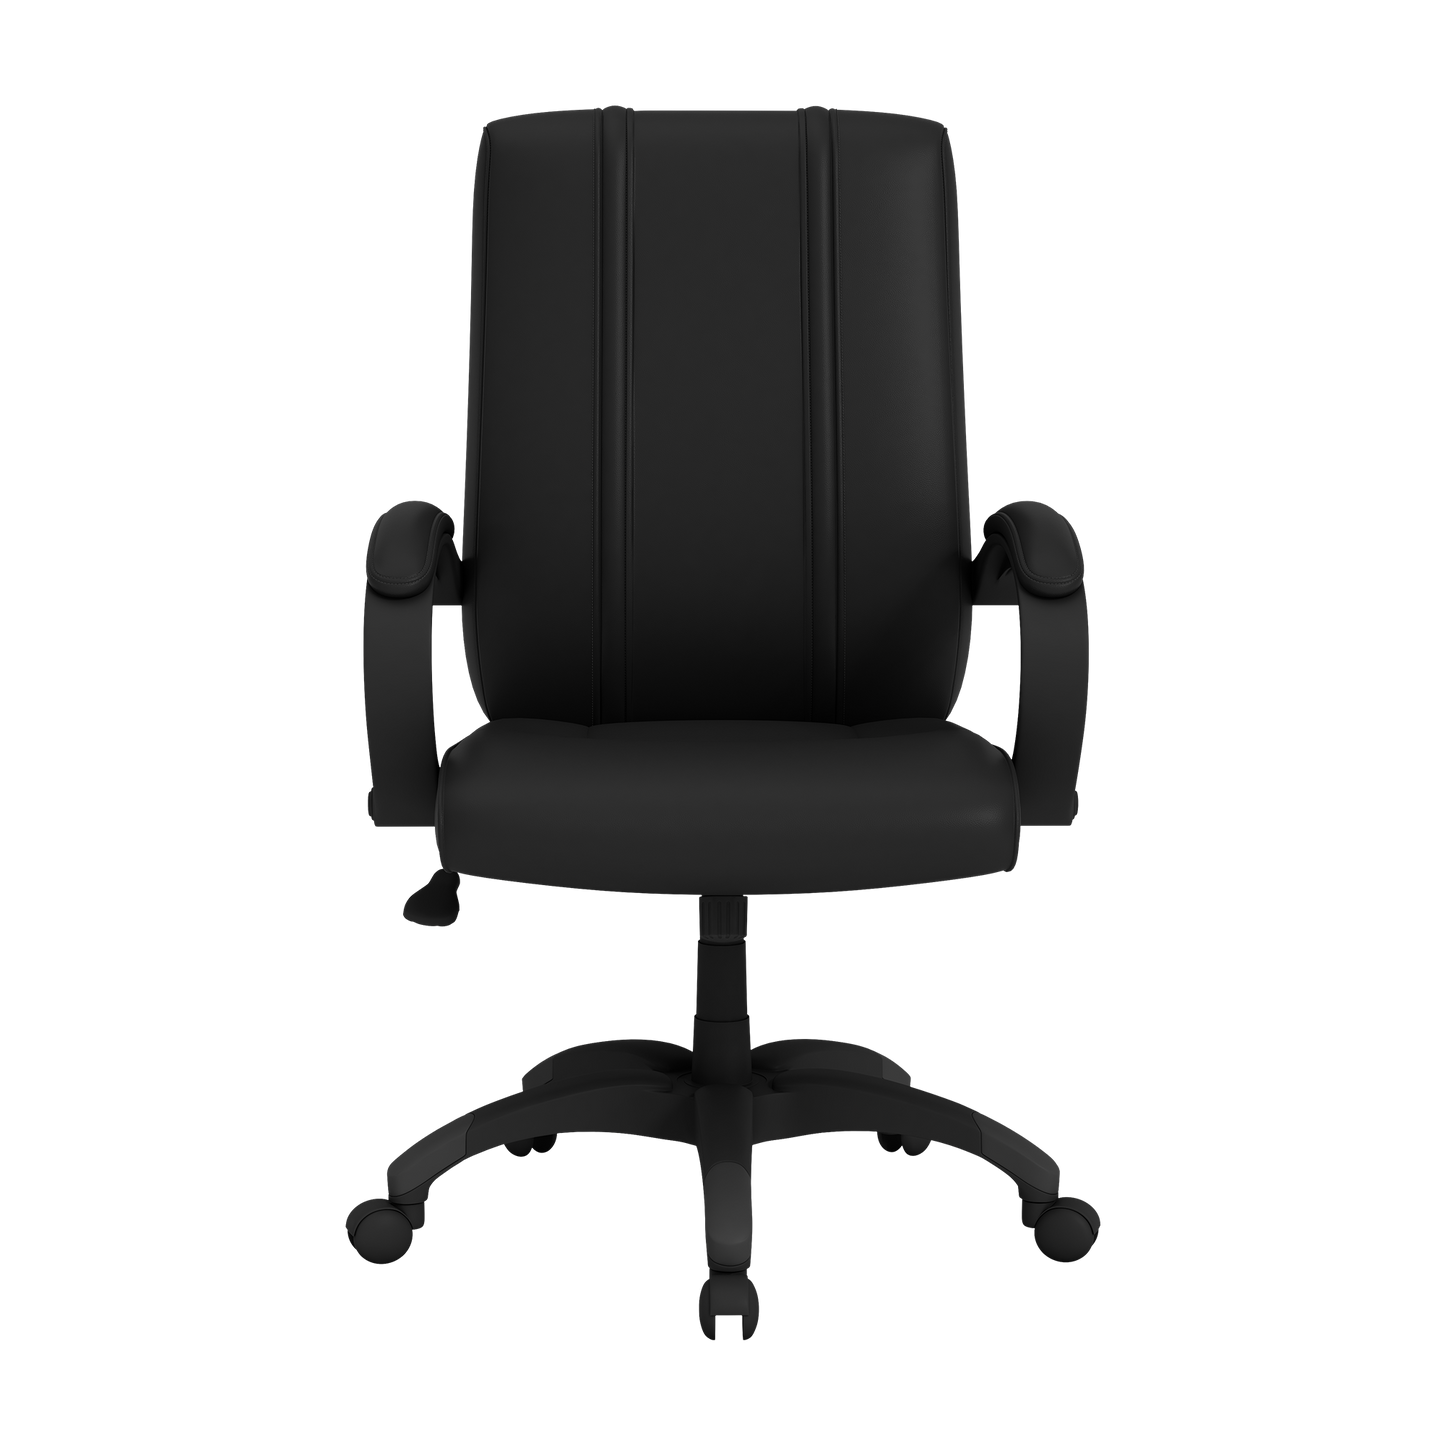 Office Chair 1000 with Utah Utes Logo